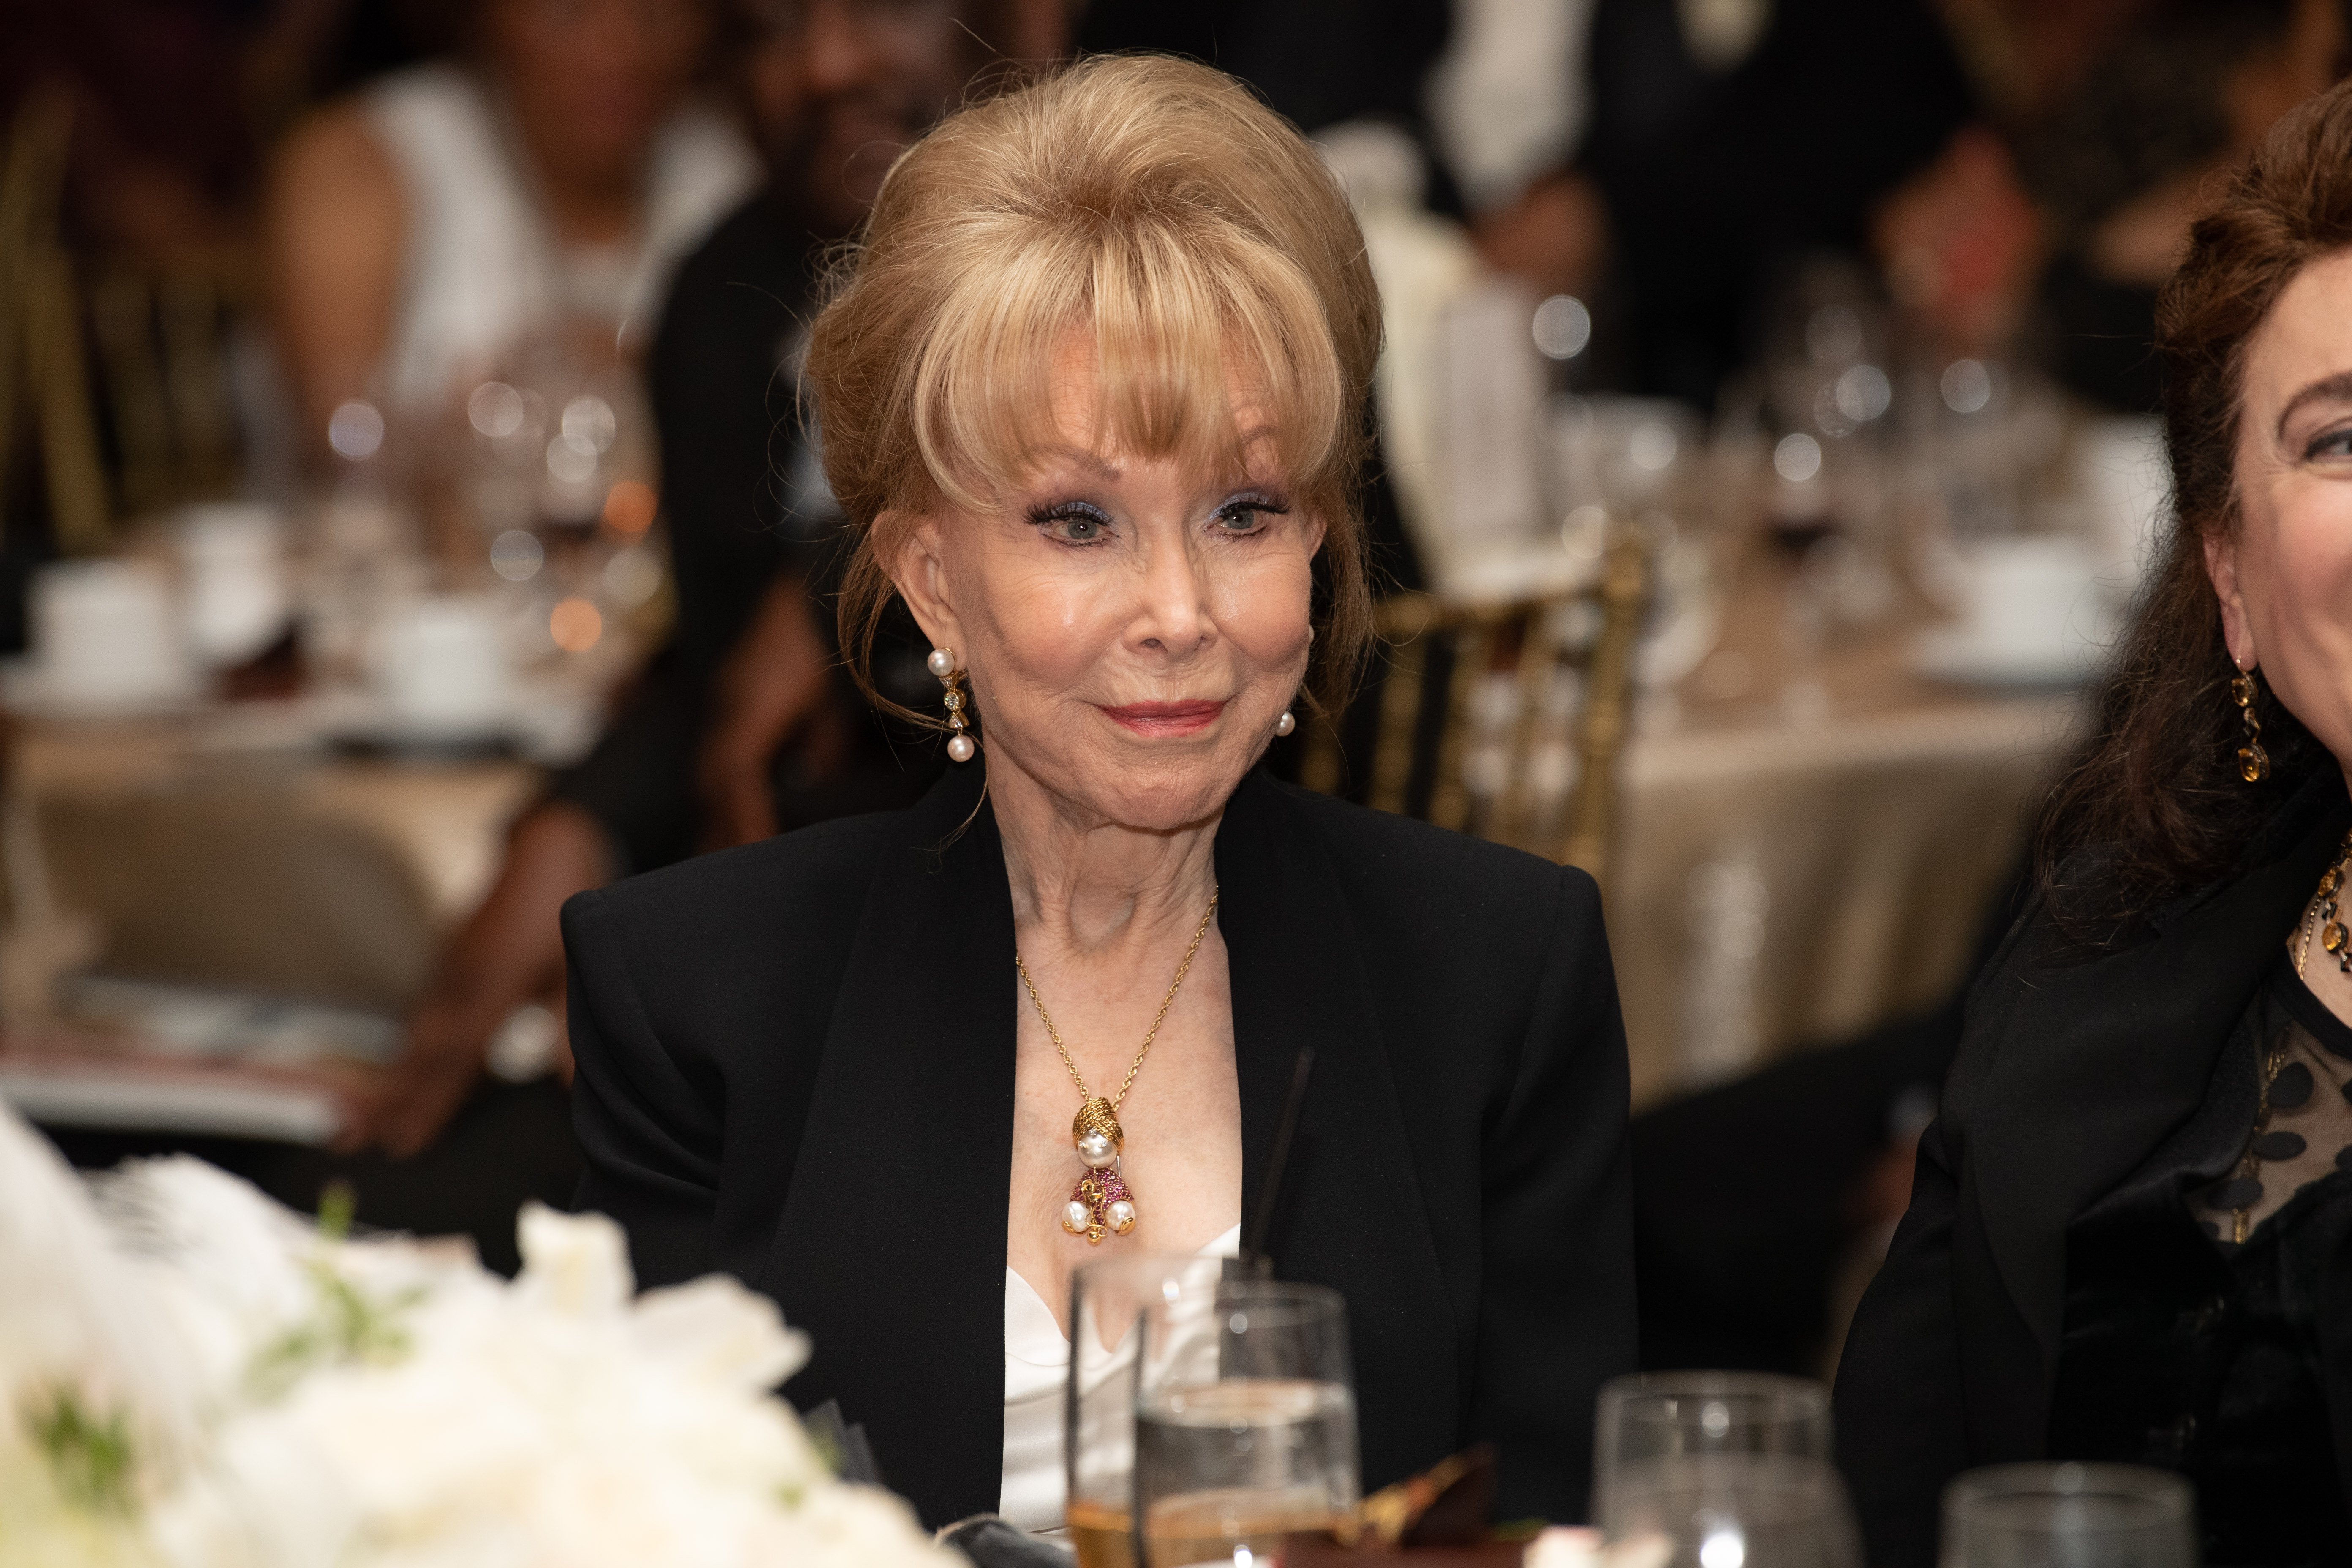 Barbara Eden attends the YWCA Greater Los Angeles 125th Anniversary Gala in Hollywood, California on November 1, 2018 | Photo: Getty images